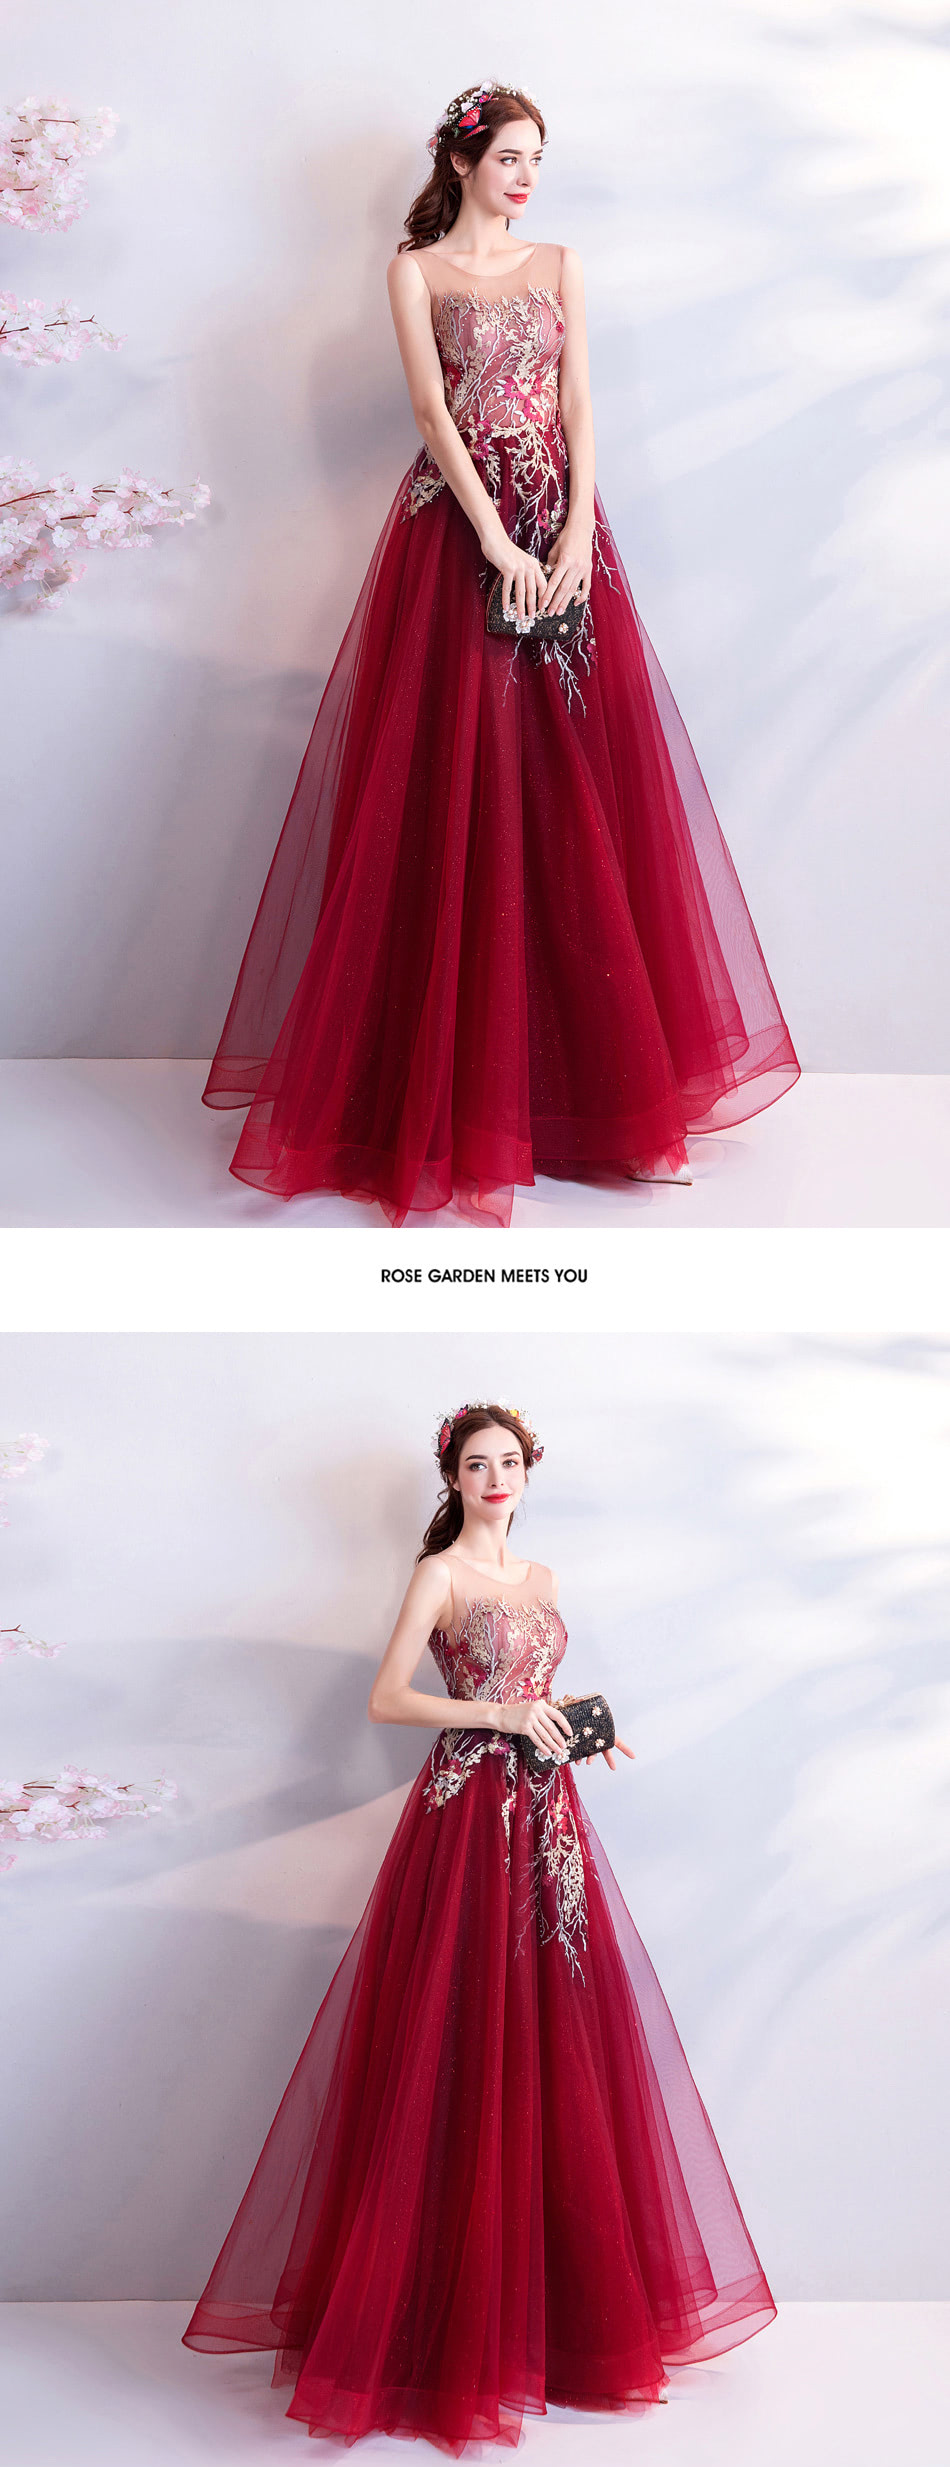 Gorgeous-Red-Couture-Dress-for-Wedding-Party-Prom-All-Occasions15.jpg